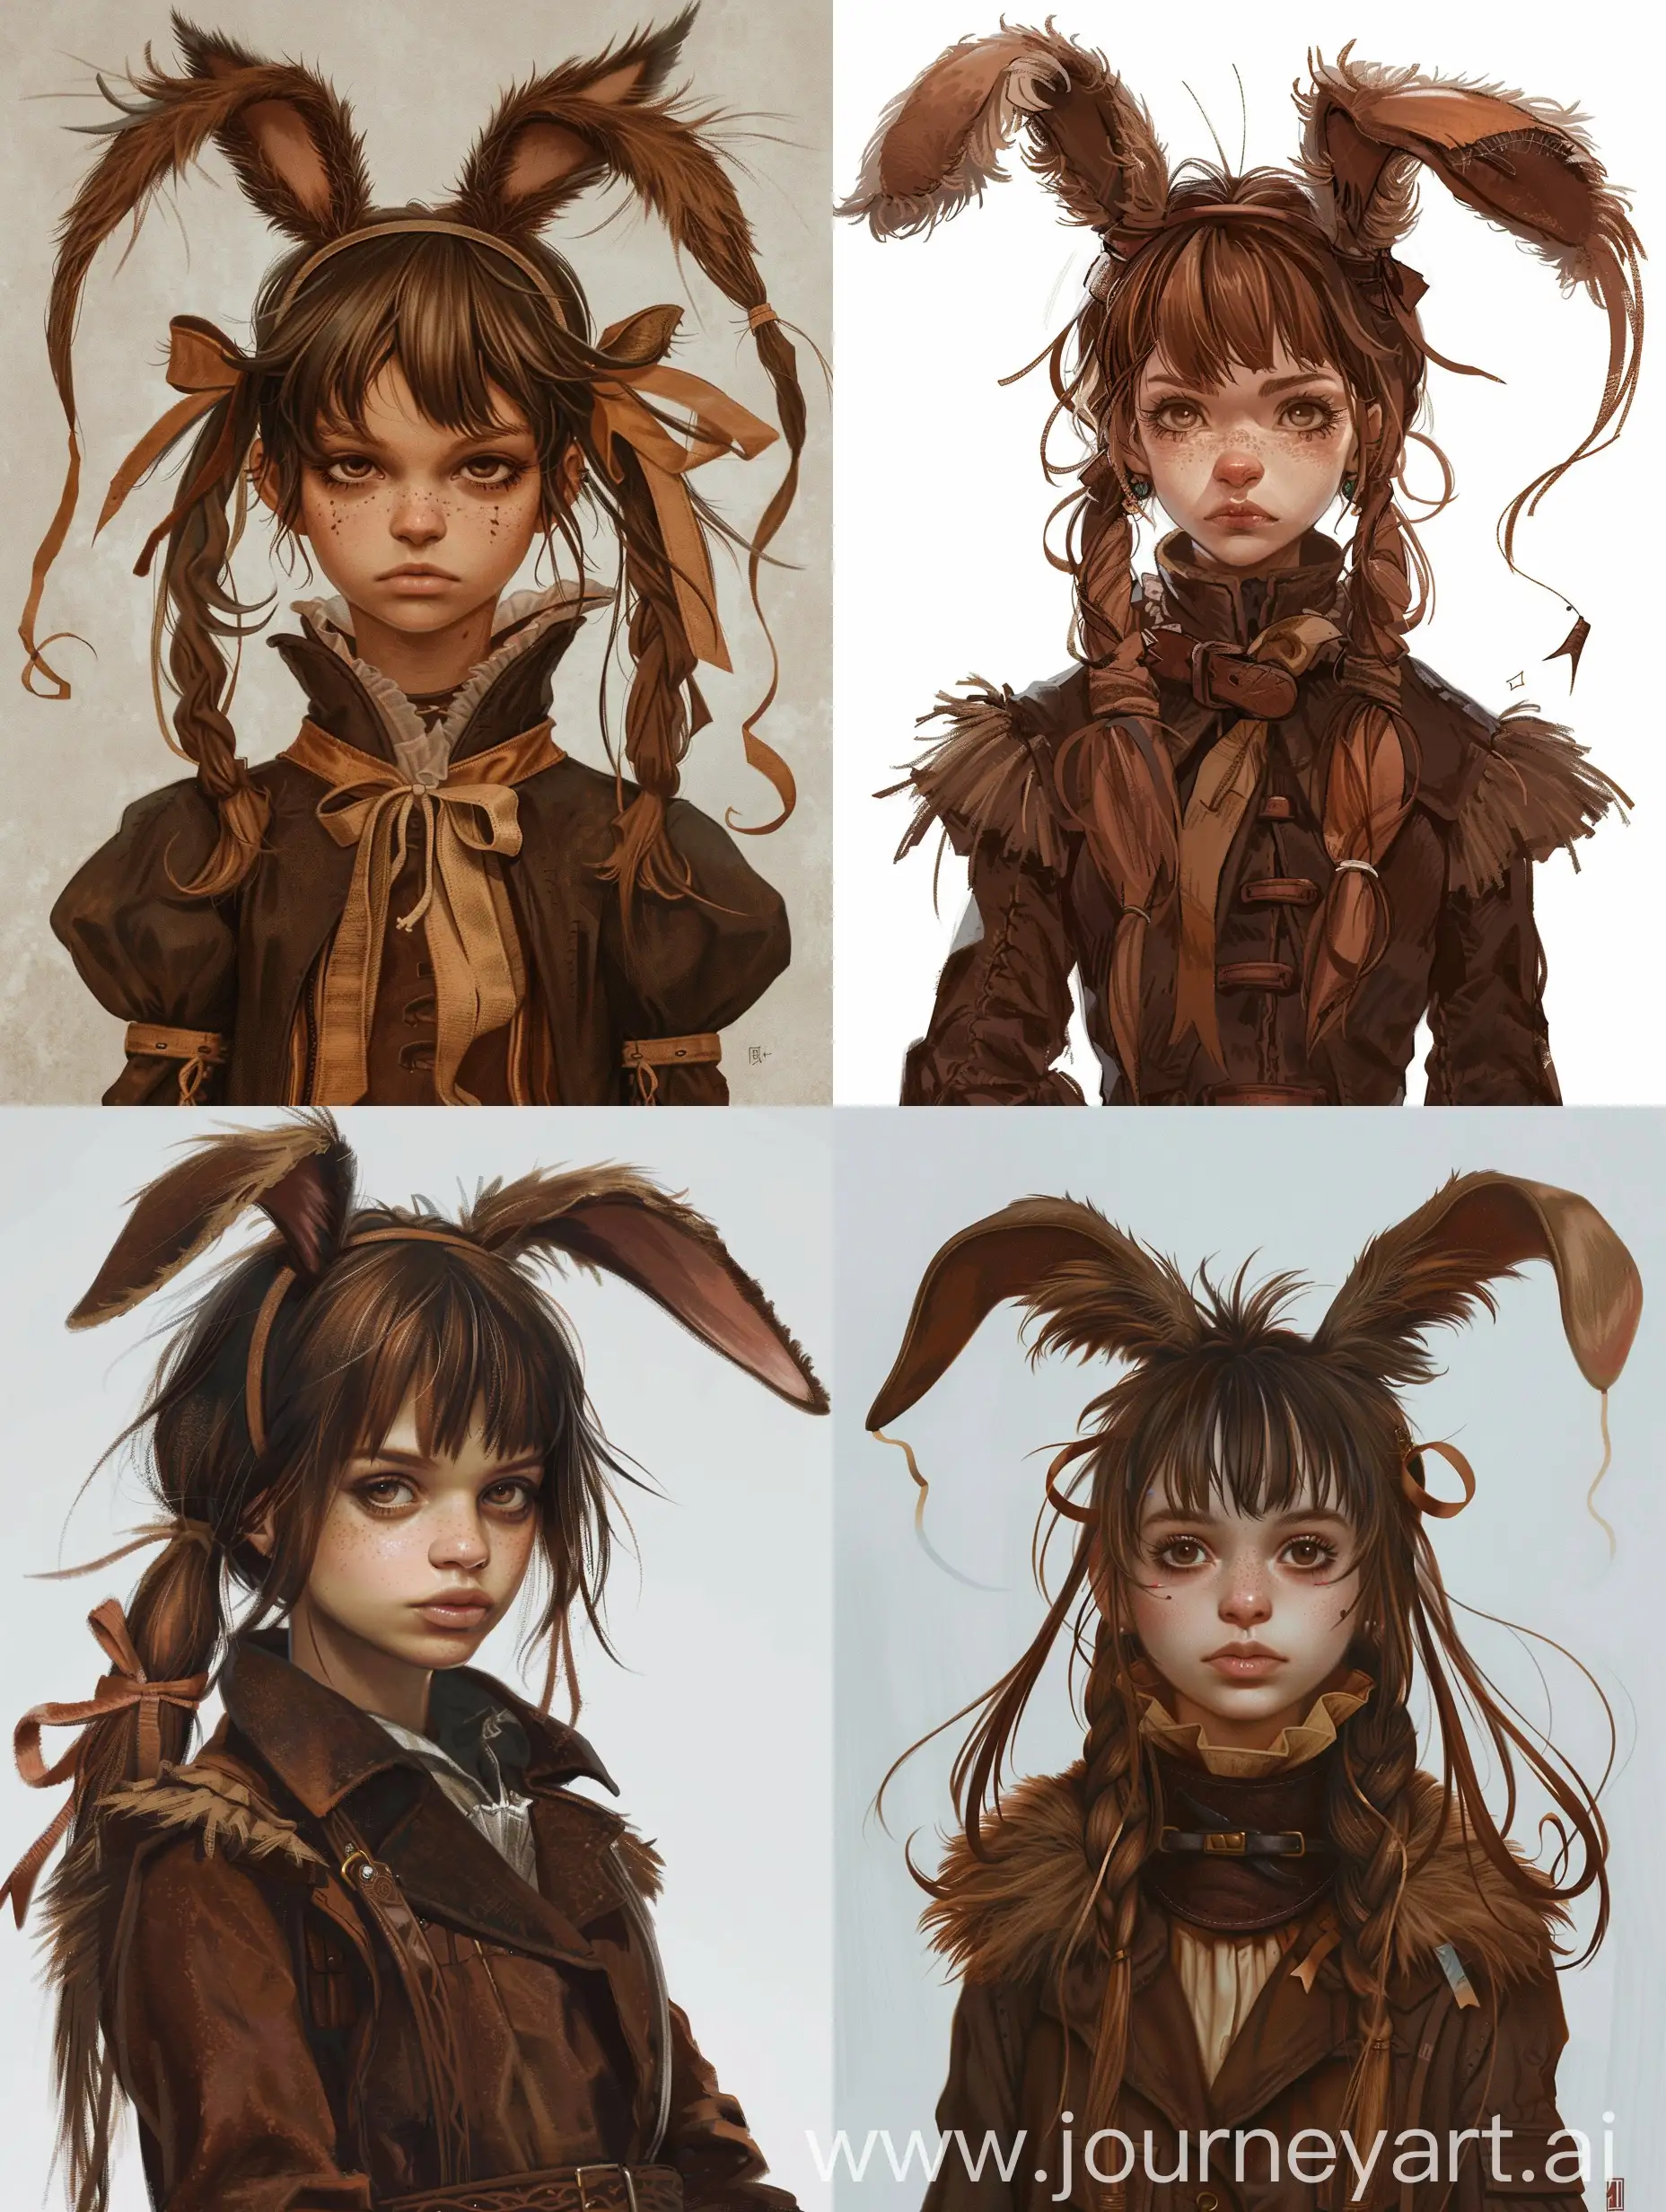 Expressionless-Girl-in-Brown-Fantasy-Victorian-Explorer-Outfit-with-Rabbit-Ears